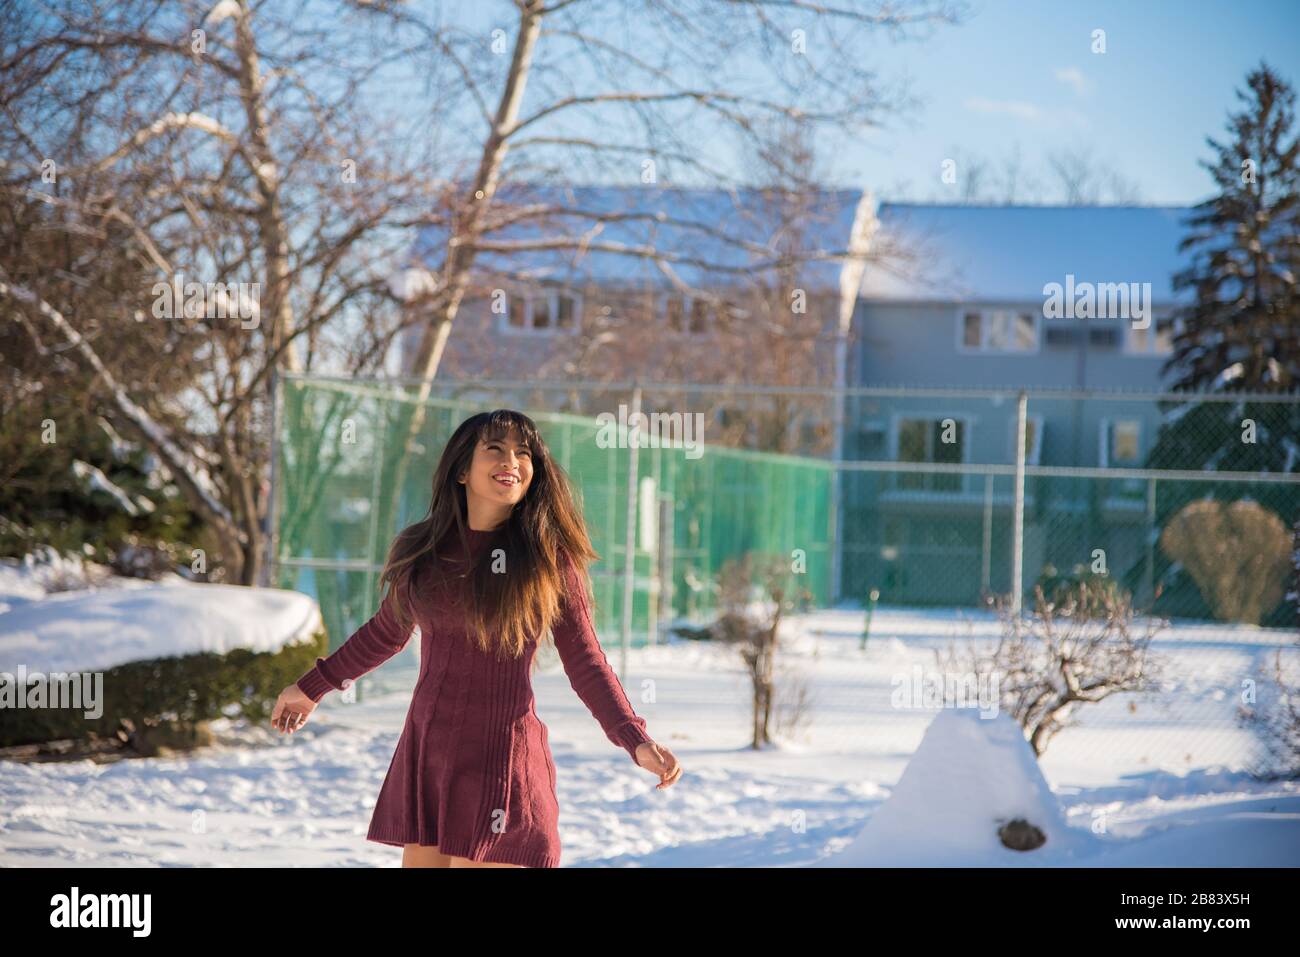 Woman having fun and enjoying snow after snowstorm on sunny day Stock Photo